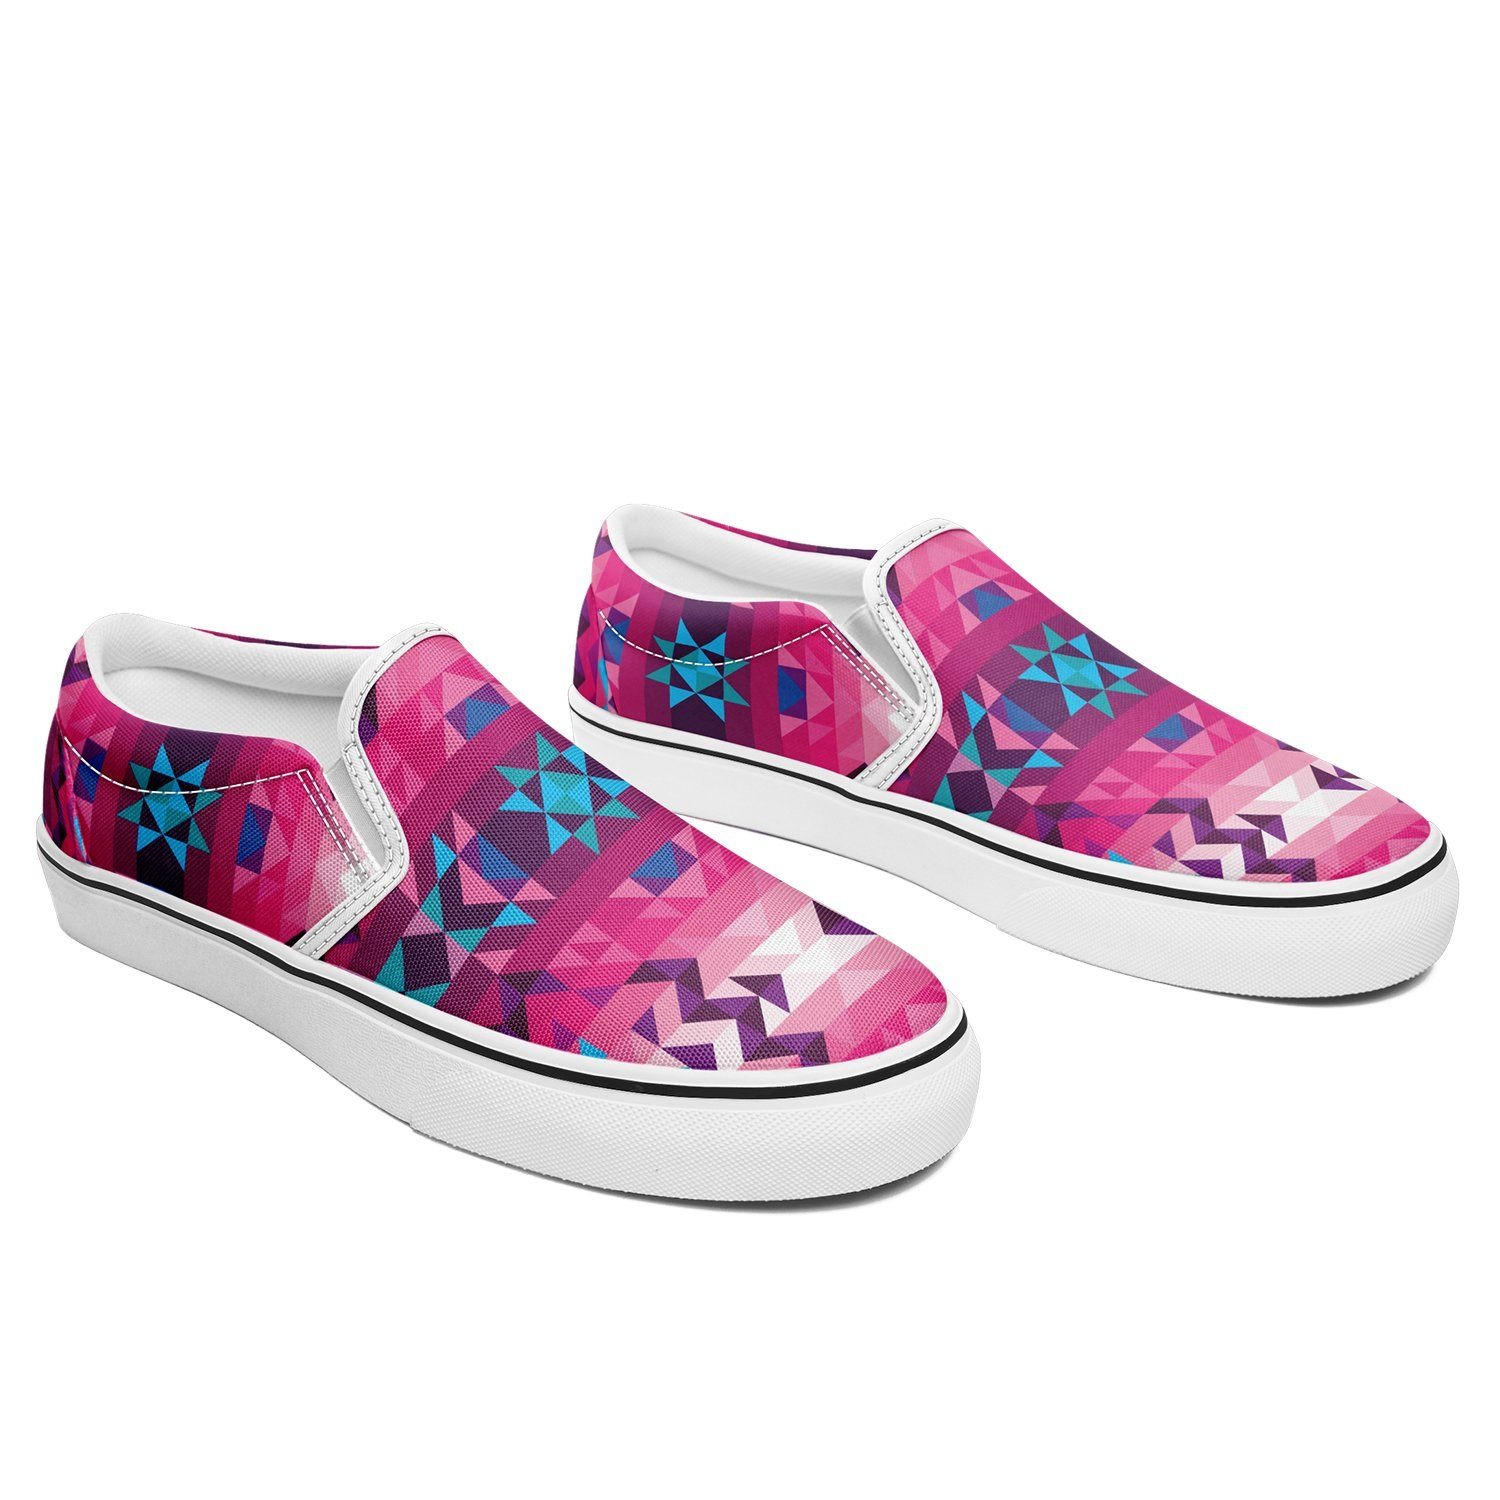 Bright Wave Otoyimm Canvas Slip On Shoes